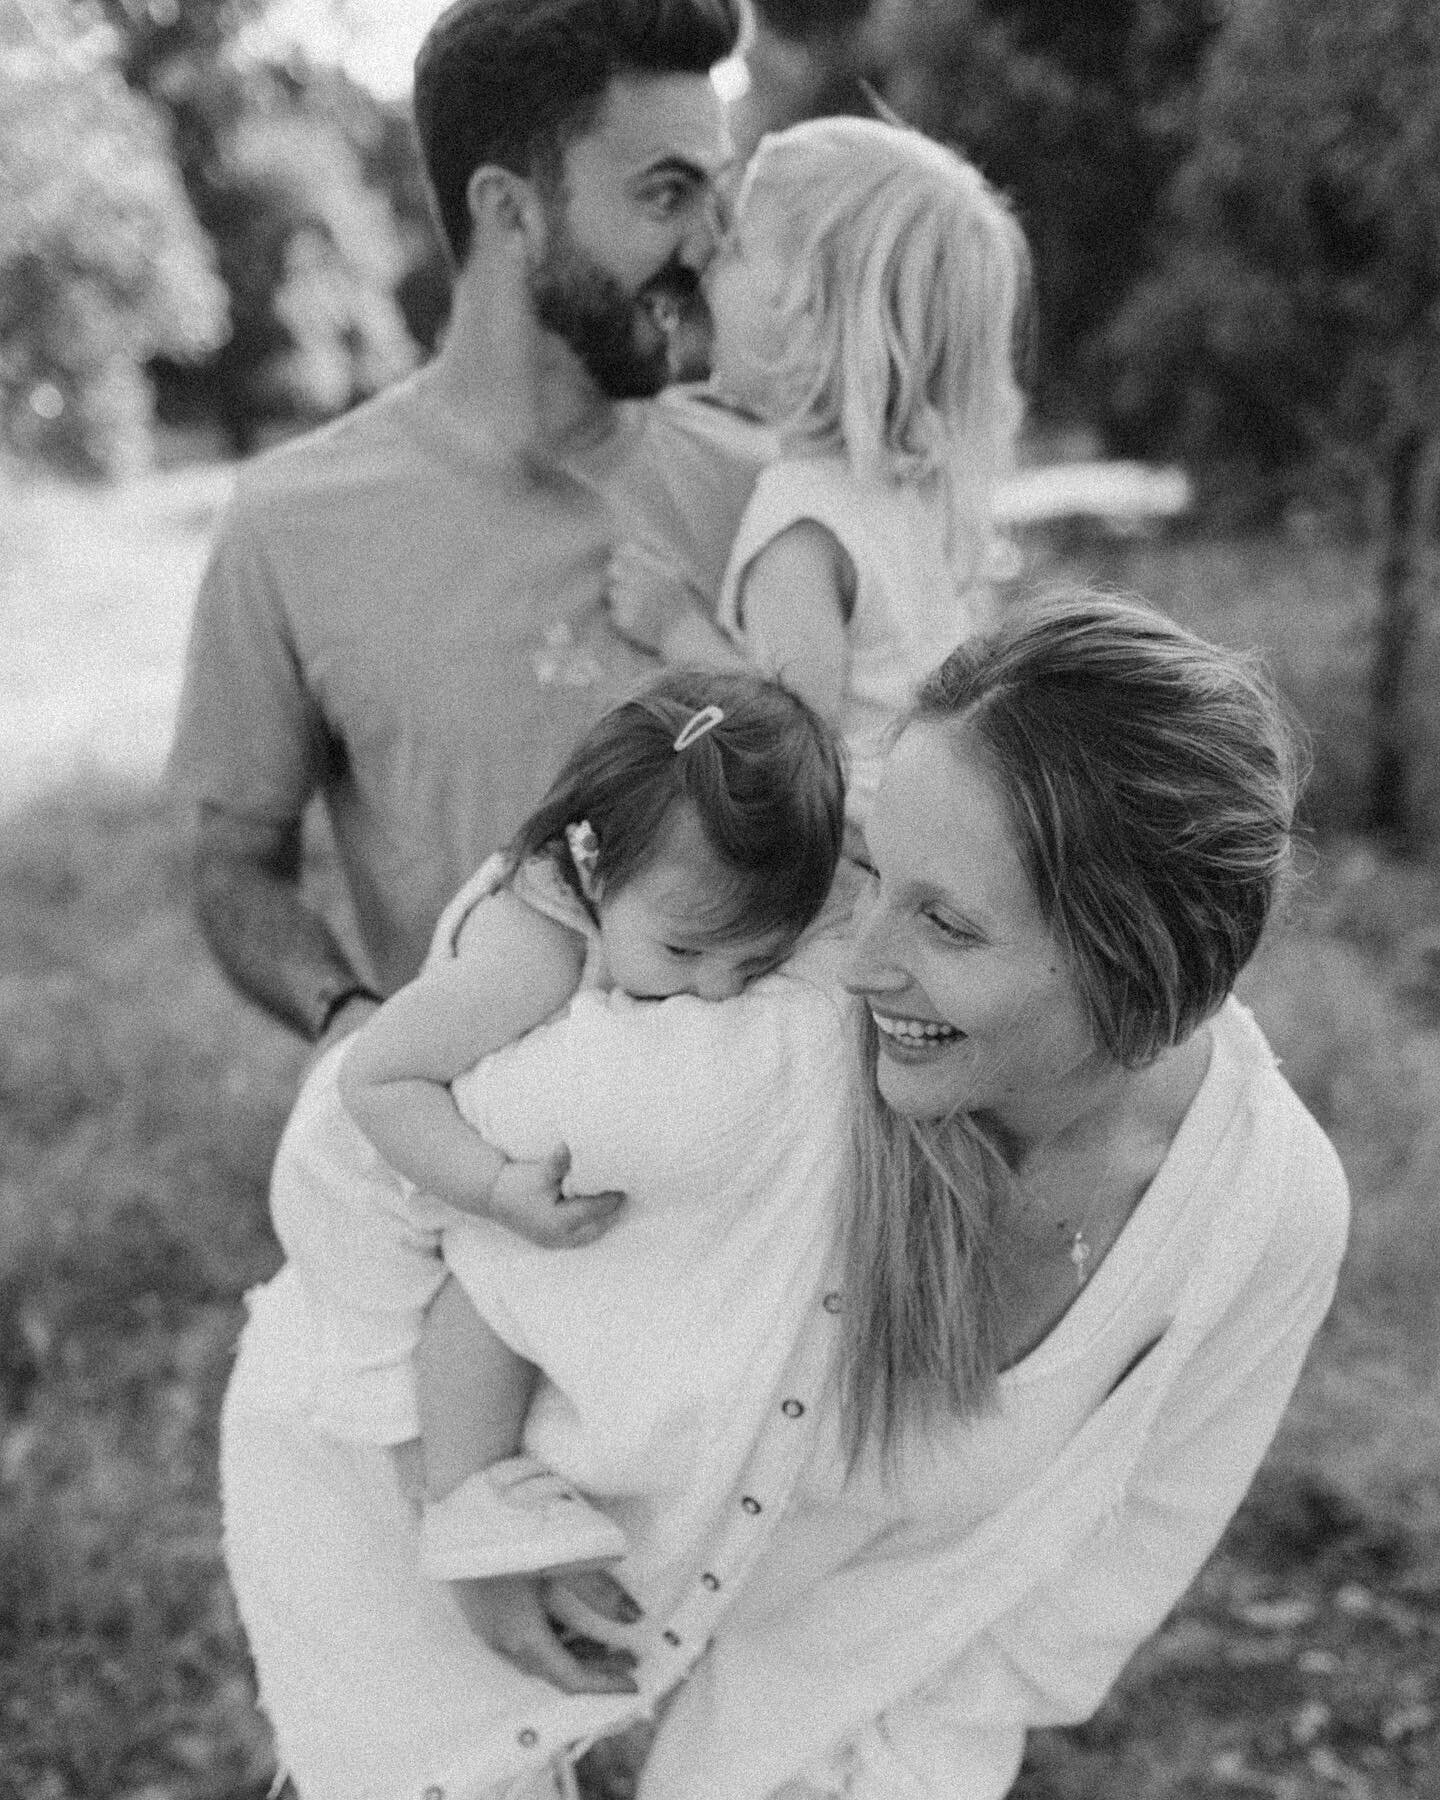 A black and white image of a family outdoors: a smiling woman holding a baby while a man, looking at a little girl on his shoulders, appears joyful.